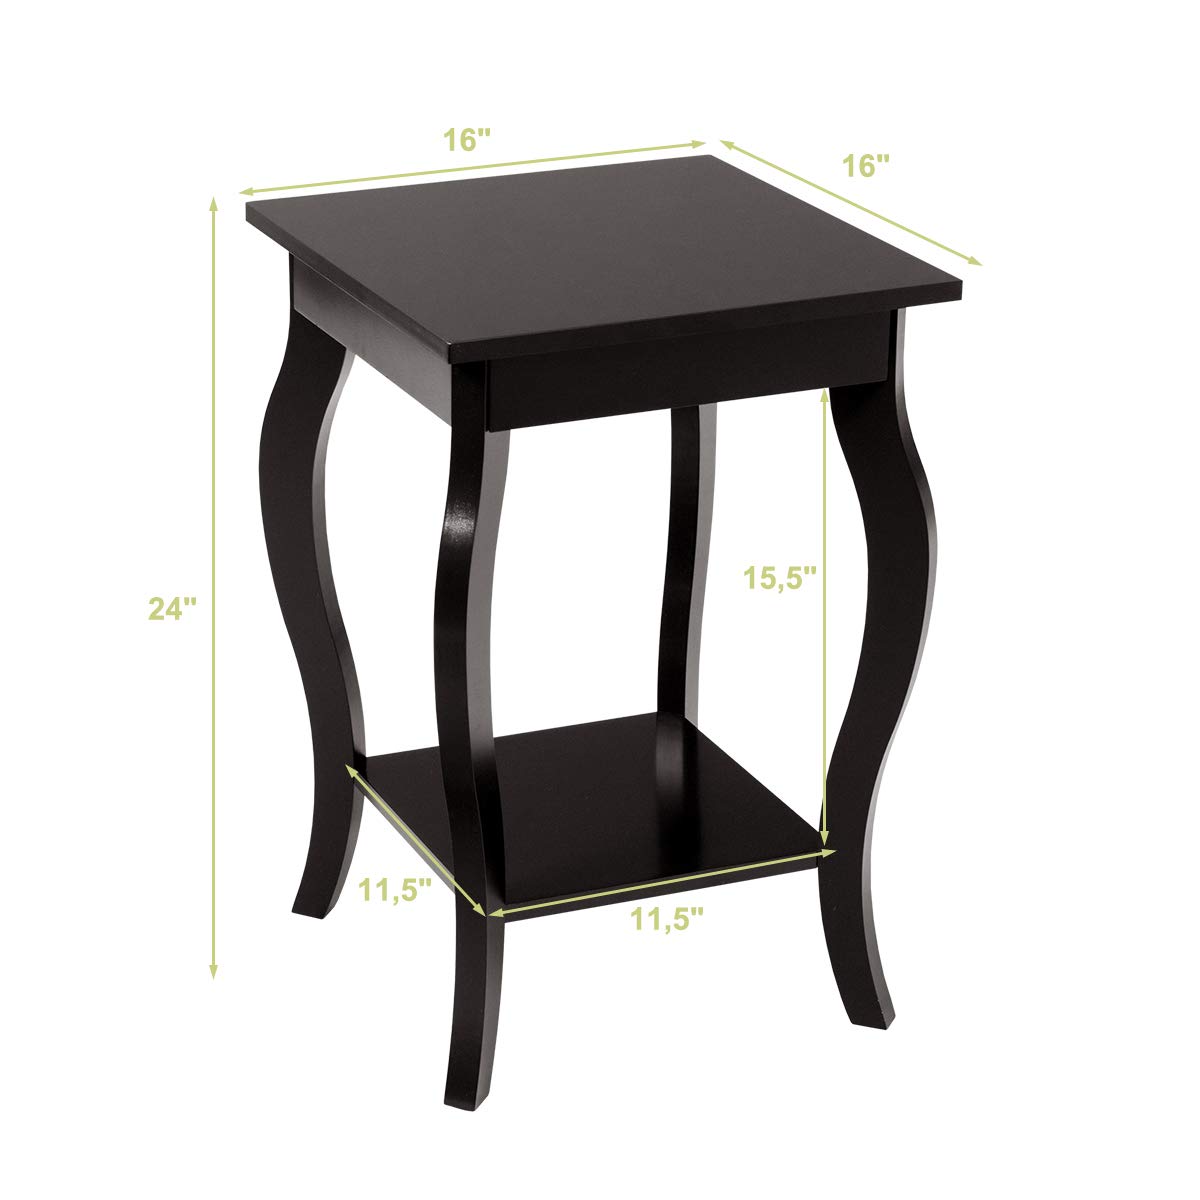 16" End Table W/Storage & Shelf Curved Legs Home Furniture for Living Room